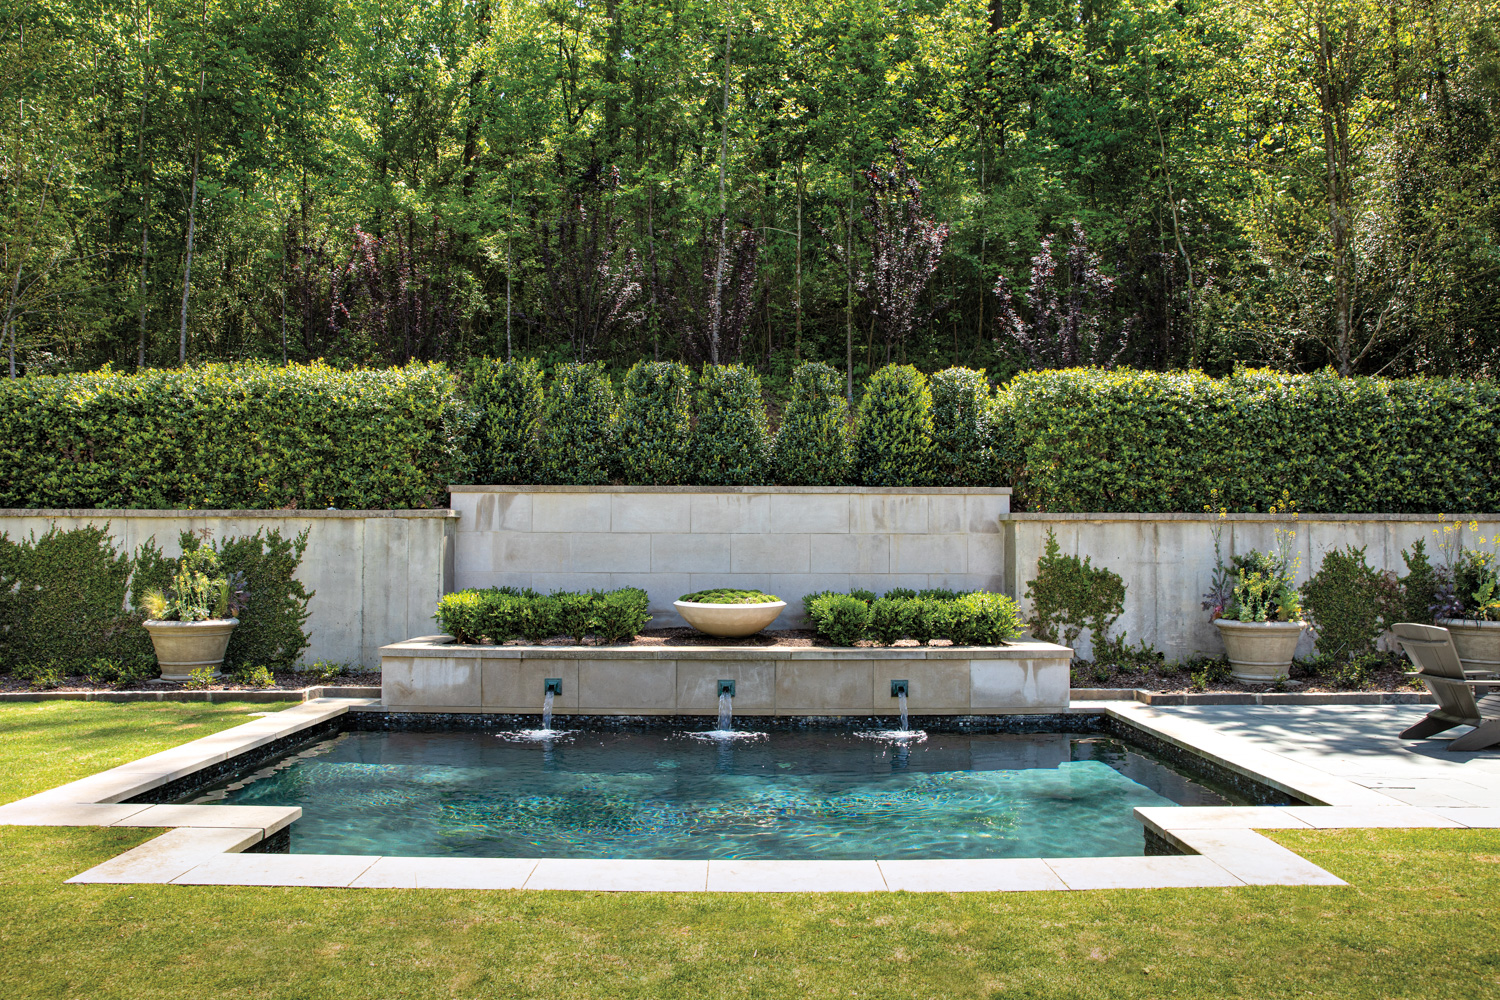 Placid swimming pool with fountain, a trim grass lawn and formal clipped boxwood border